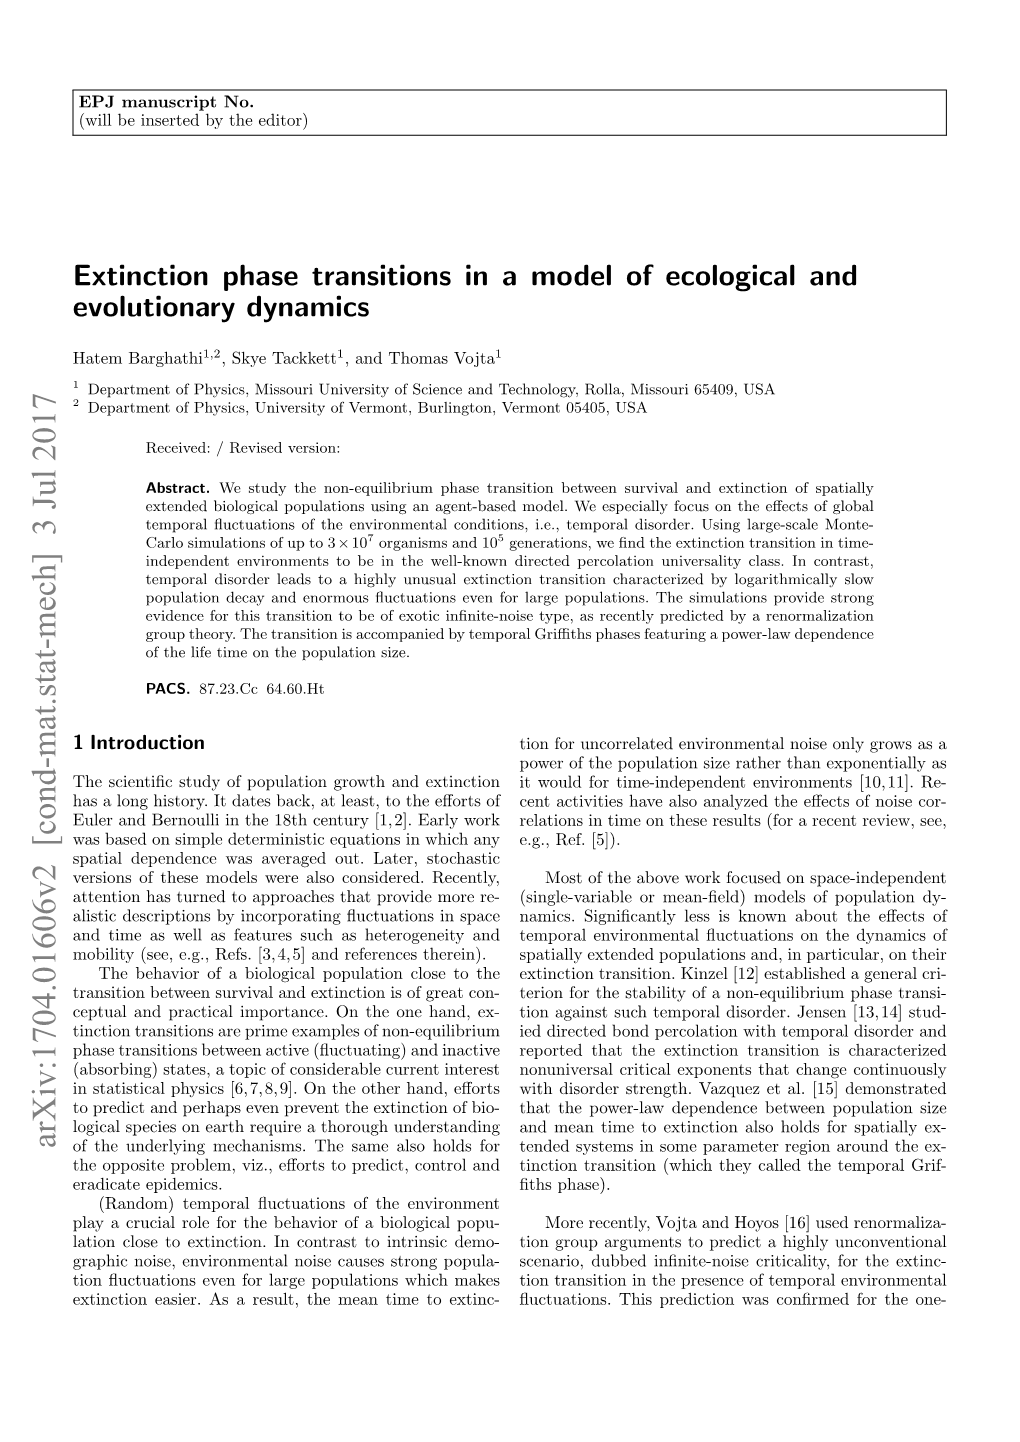 Extinction Phase Transitions in a Model of Ecological and Evolutionary Dynamics